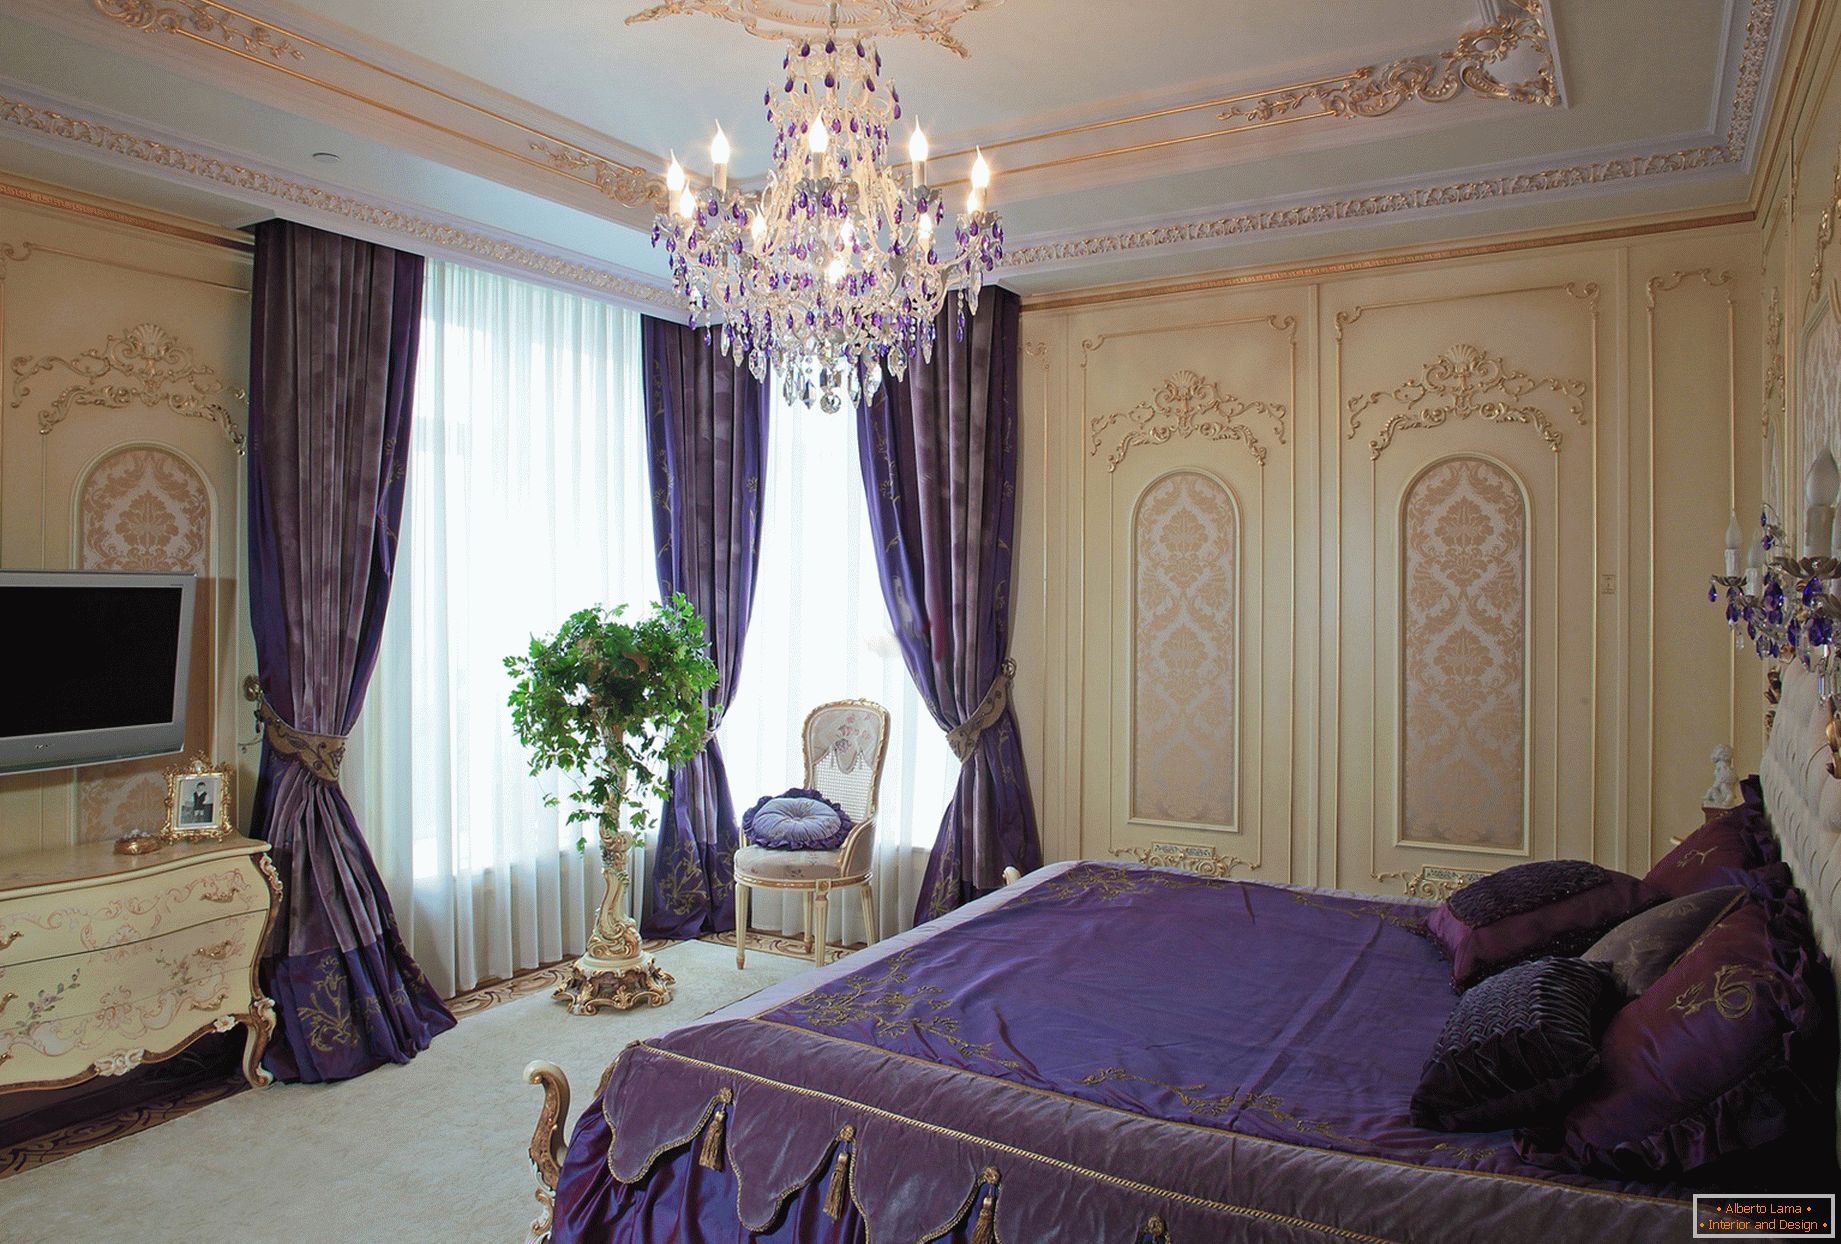 Stylish bedroom in baroque style. A subtle design concept - dark purple curtains are combined with bedding matched in tone.